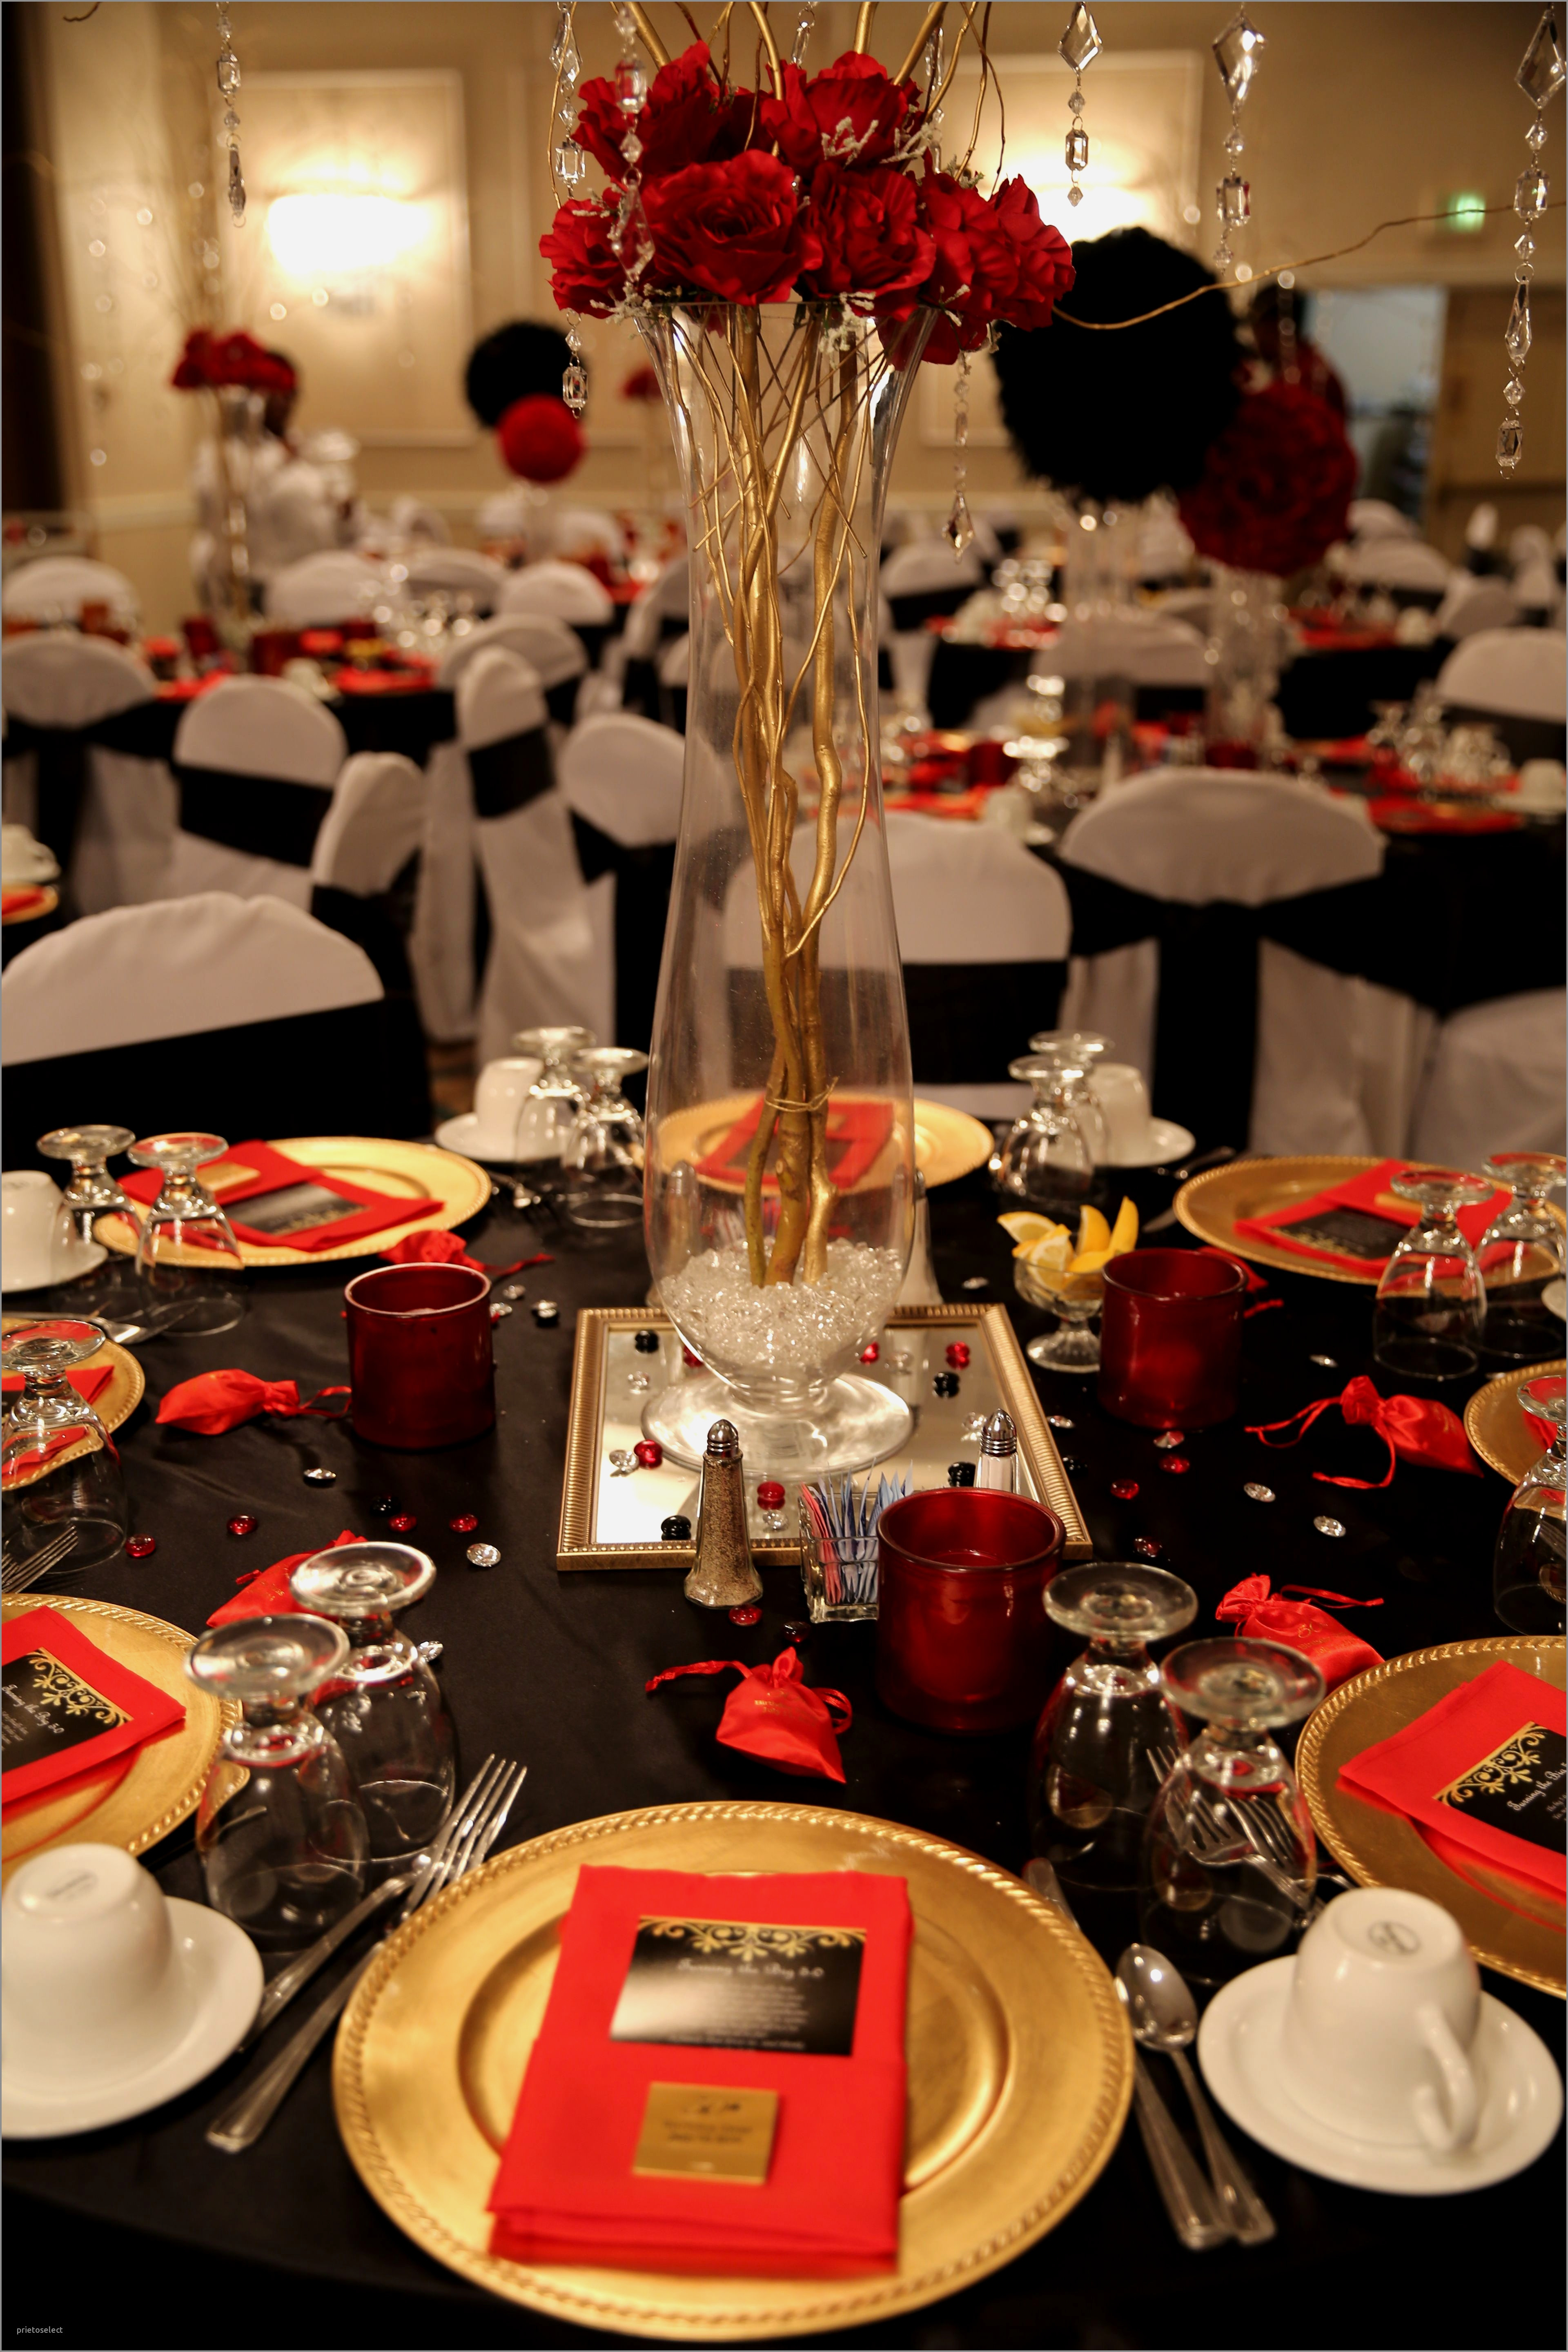 29 Lovely Glass Vases for Wedding Table Decorations 2022 free download glass vases for wedding table decorations of 75th birthday table decorations awesome ac2a2ec286a 15 cheap and easy diy within 75th birthday table decorations best of red black and gold table